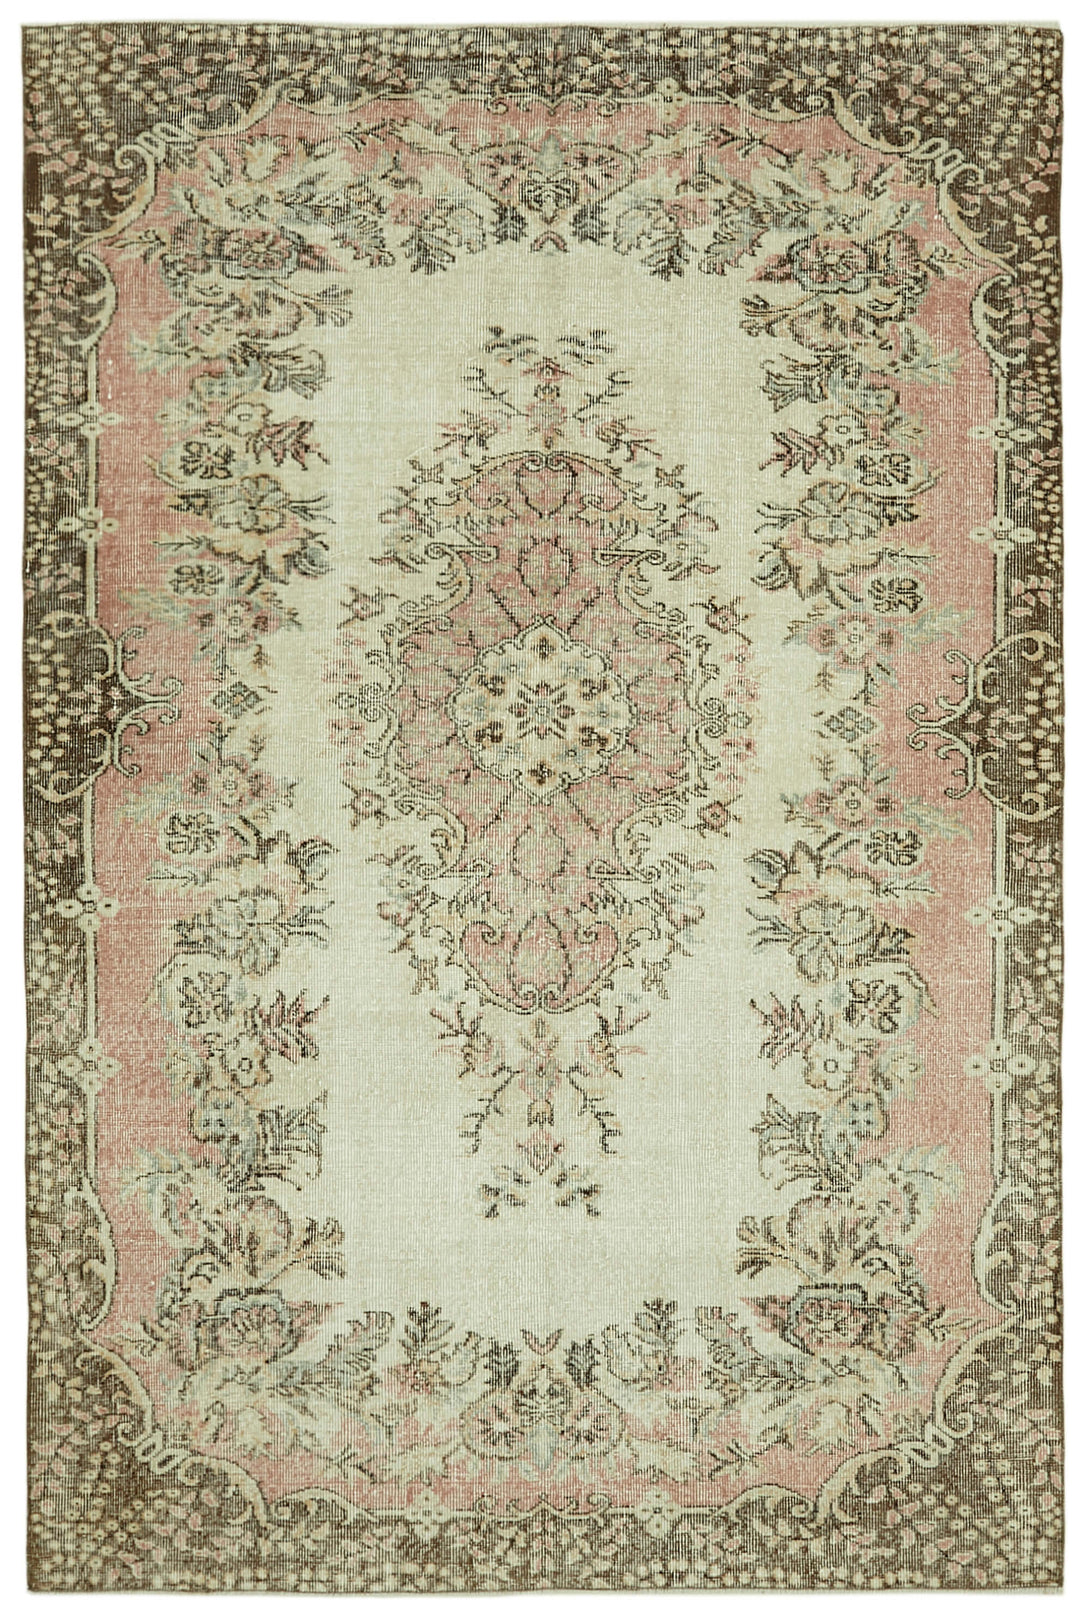 Handmade White Wash Area Rug > Design# OL-AC-41556 > Size: 5'-7" x 8'-4", Carpet Culture Rugs, Handmade Rugs, NYC Rugs, New Rugs, Shop Rugs, Rug Store, Outlet Rugs, SoHo Rugs, Rugs in USA